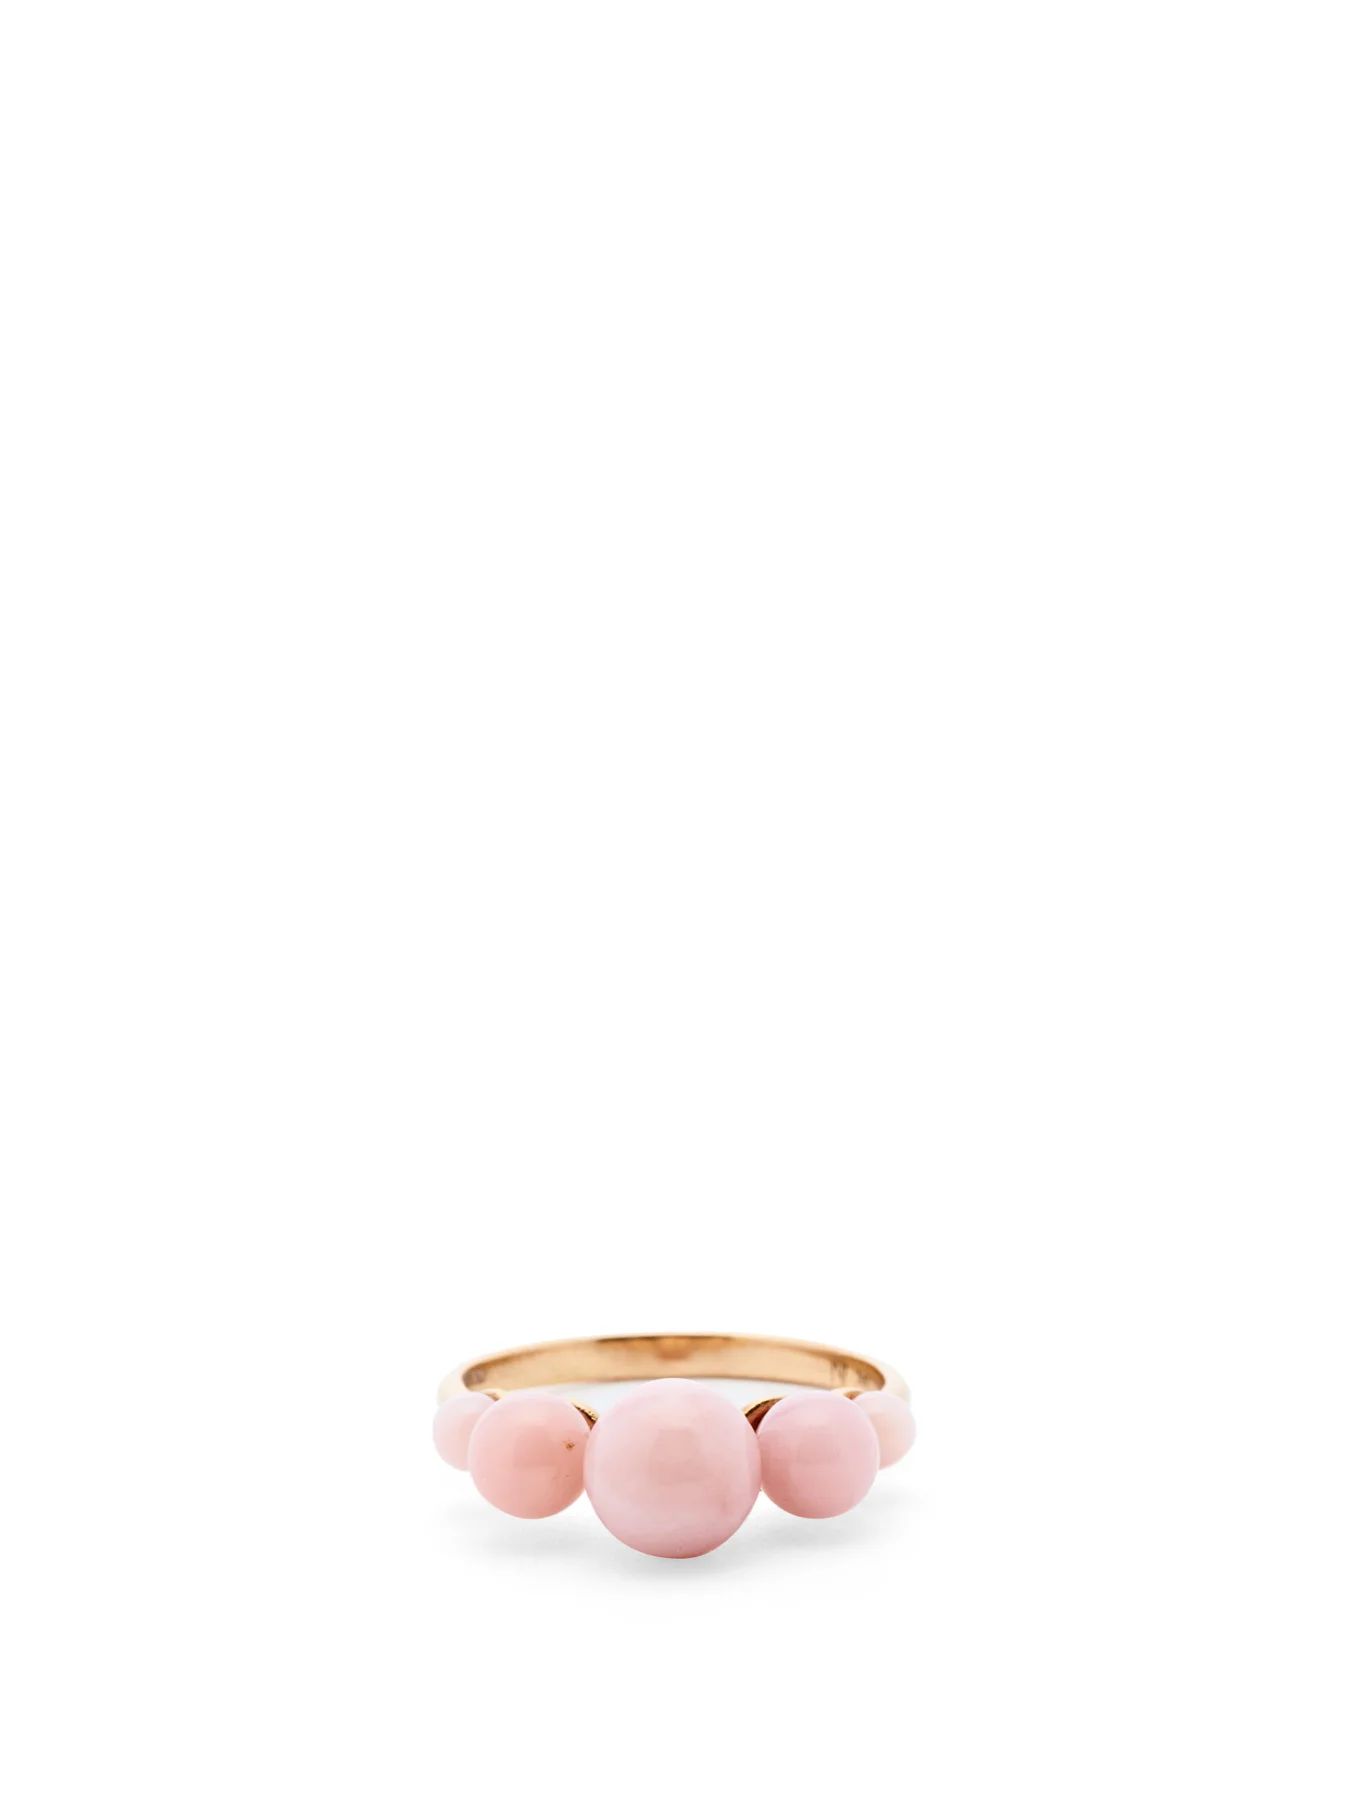 Opal & 18kt rose-gold ring | Irene Neuwirth | Matches (US)